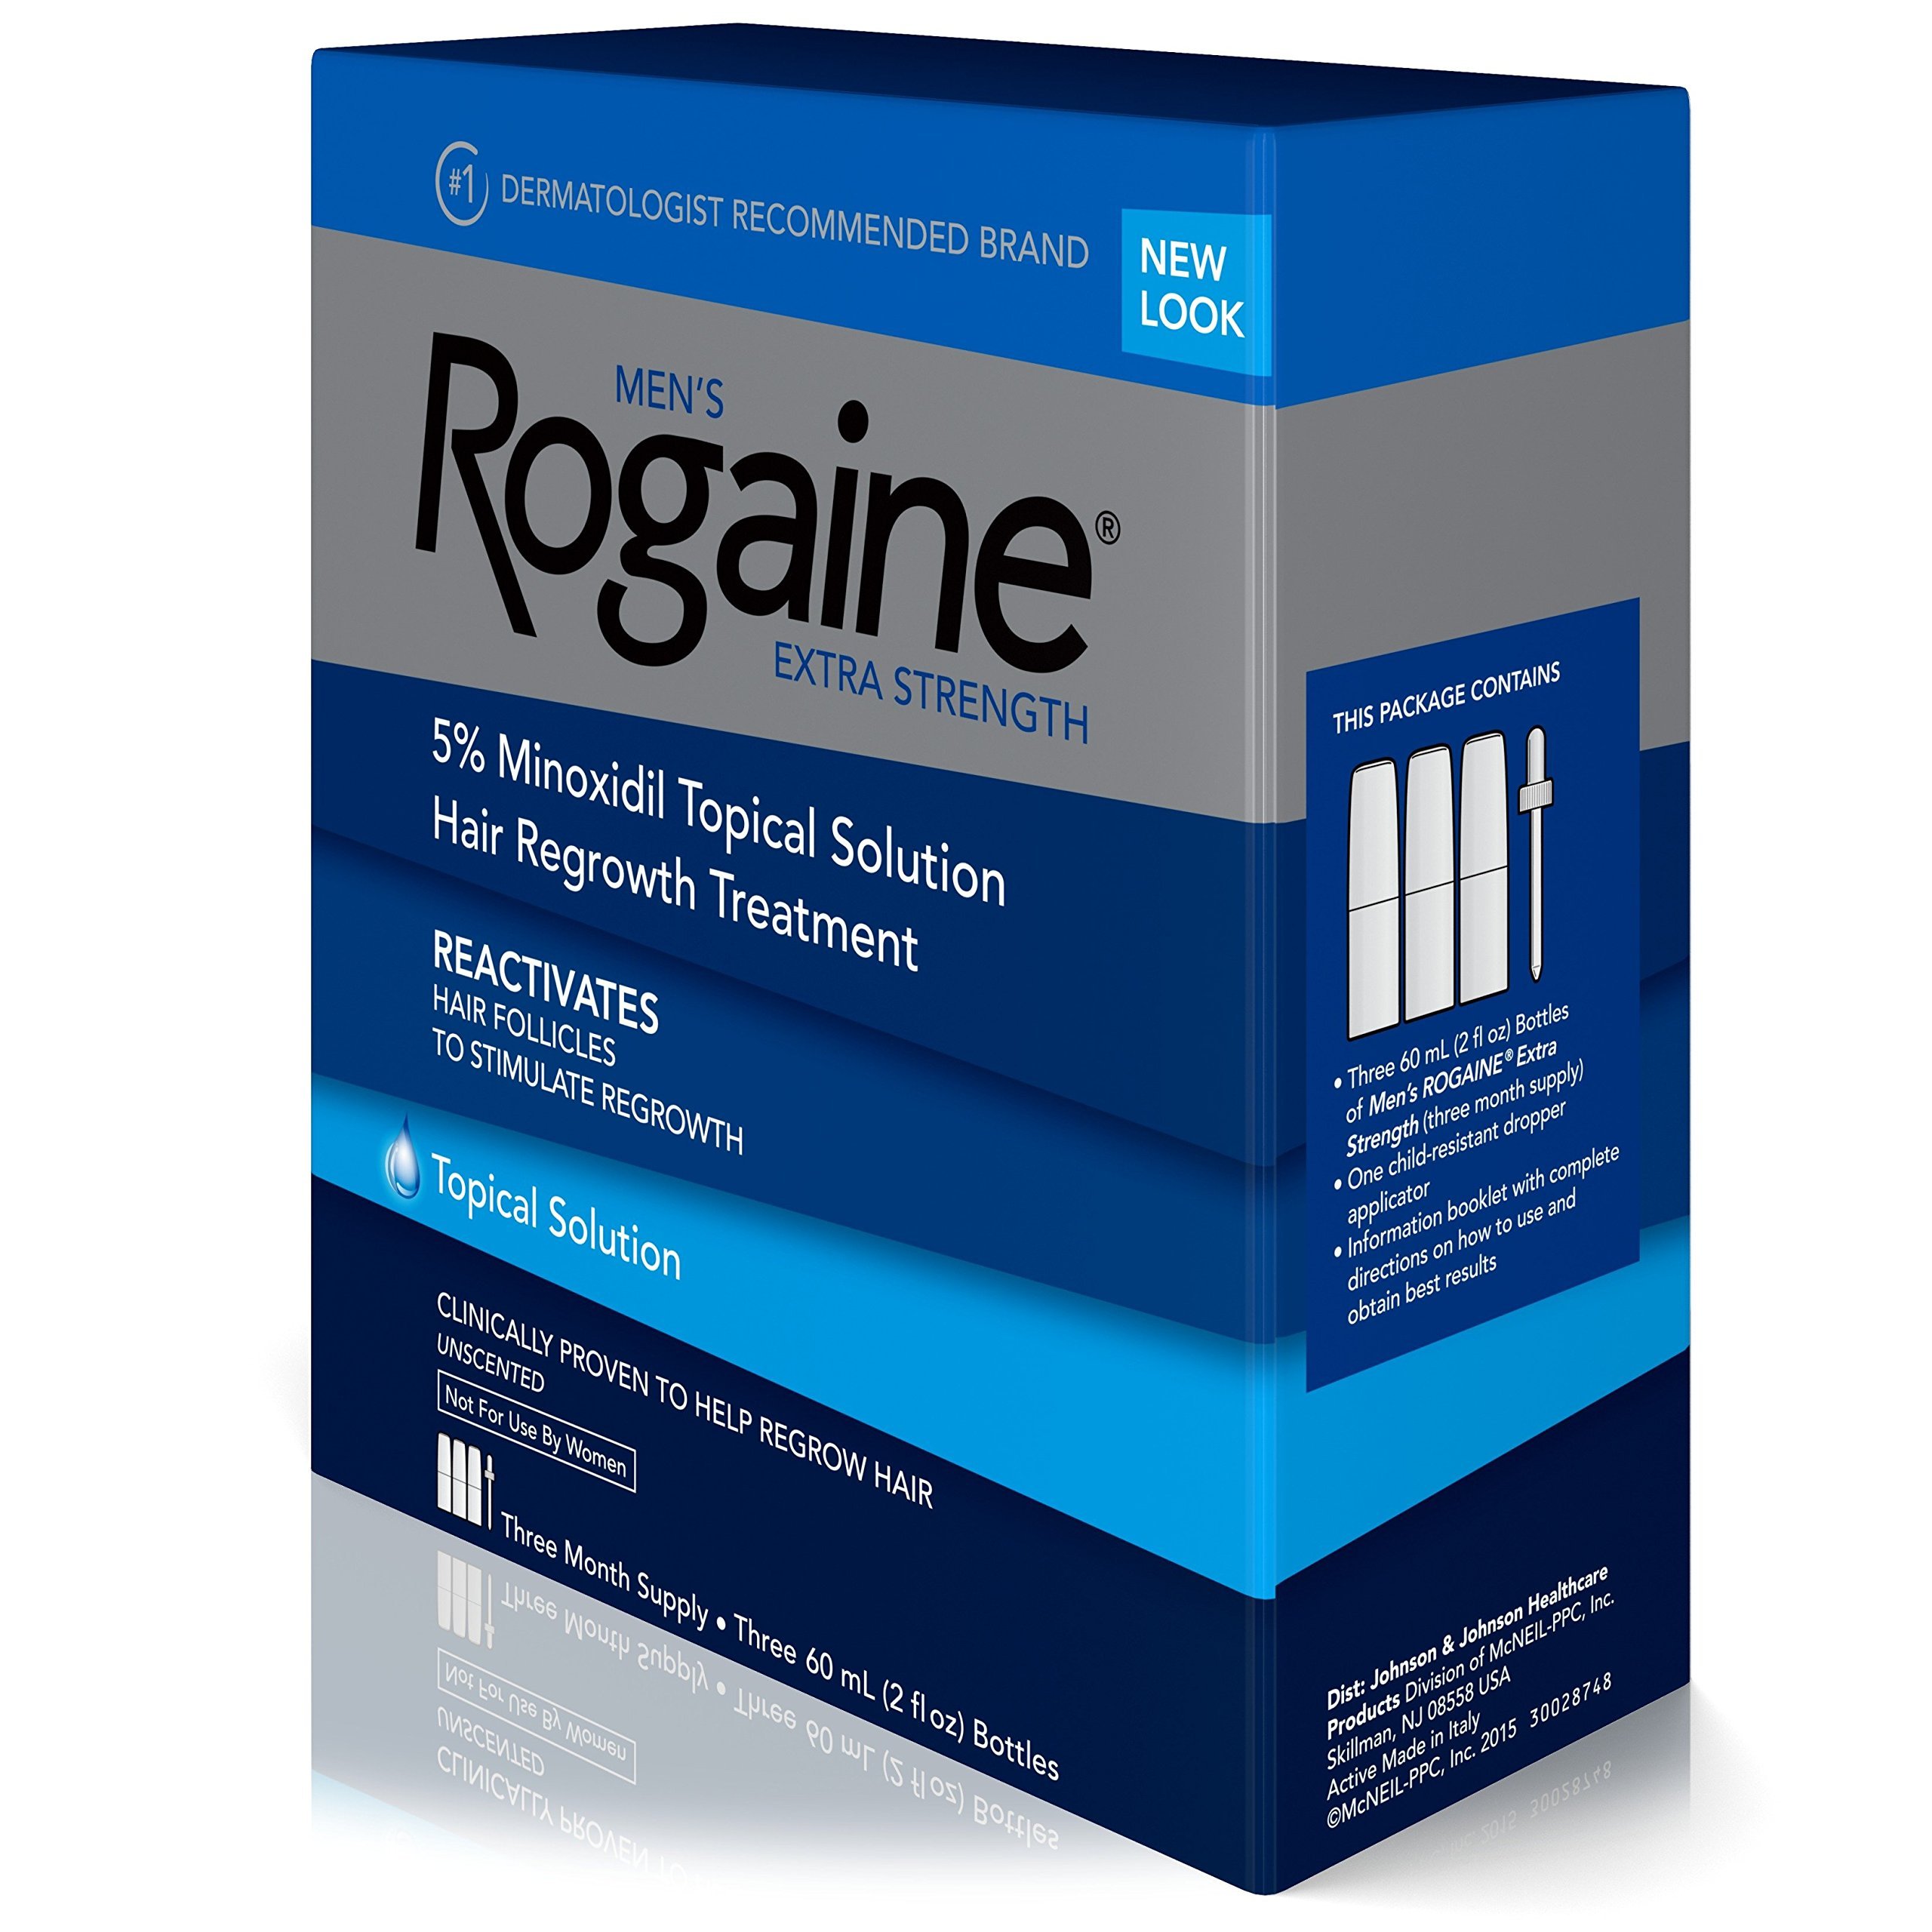 Men's Rogaine Extra Strength 5% Minoxidil Topical Solution for Hair Loss & Hair Regrowth, Topical Hair Regrowth Treatment for Men, Unscented Minoxidil Liquid, 3-Month Supply, 3 x 2 fl. oz